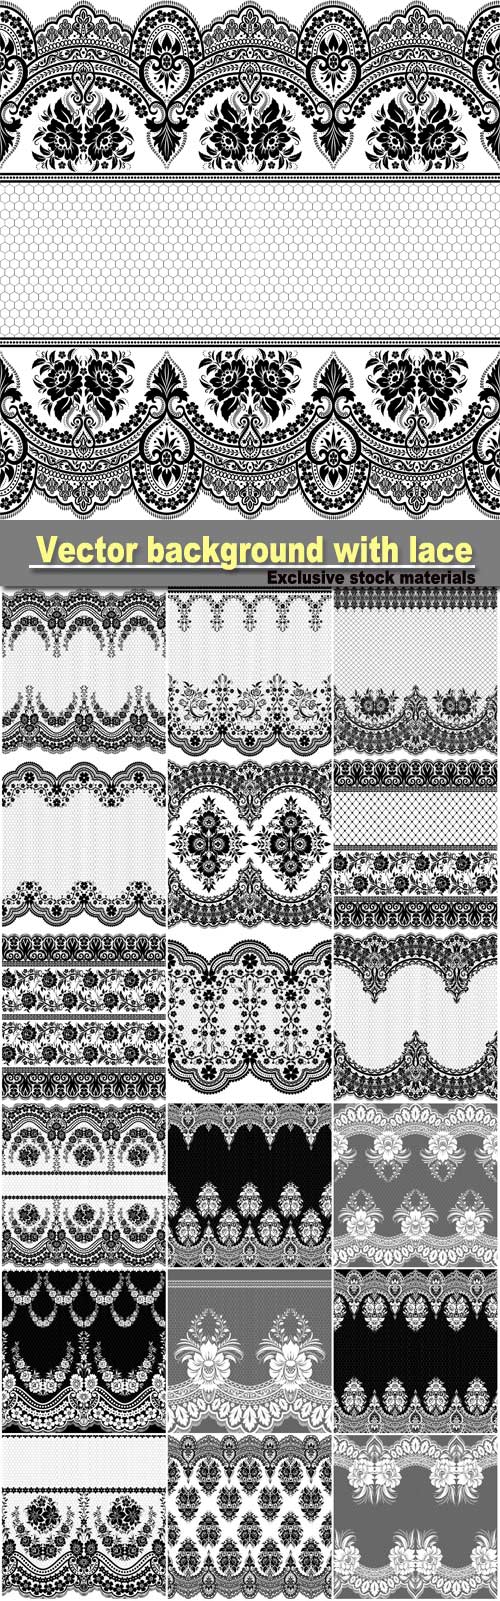 Vector background with floral lace